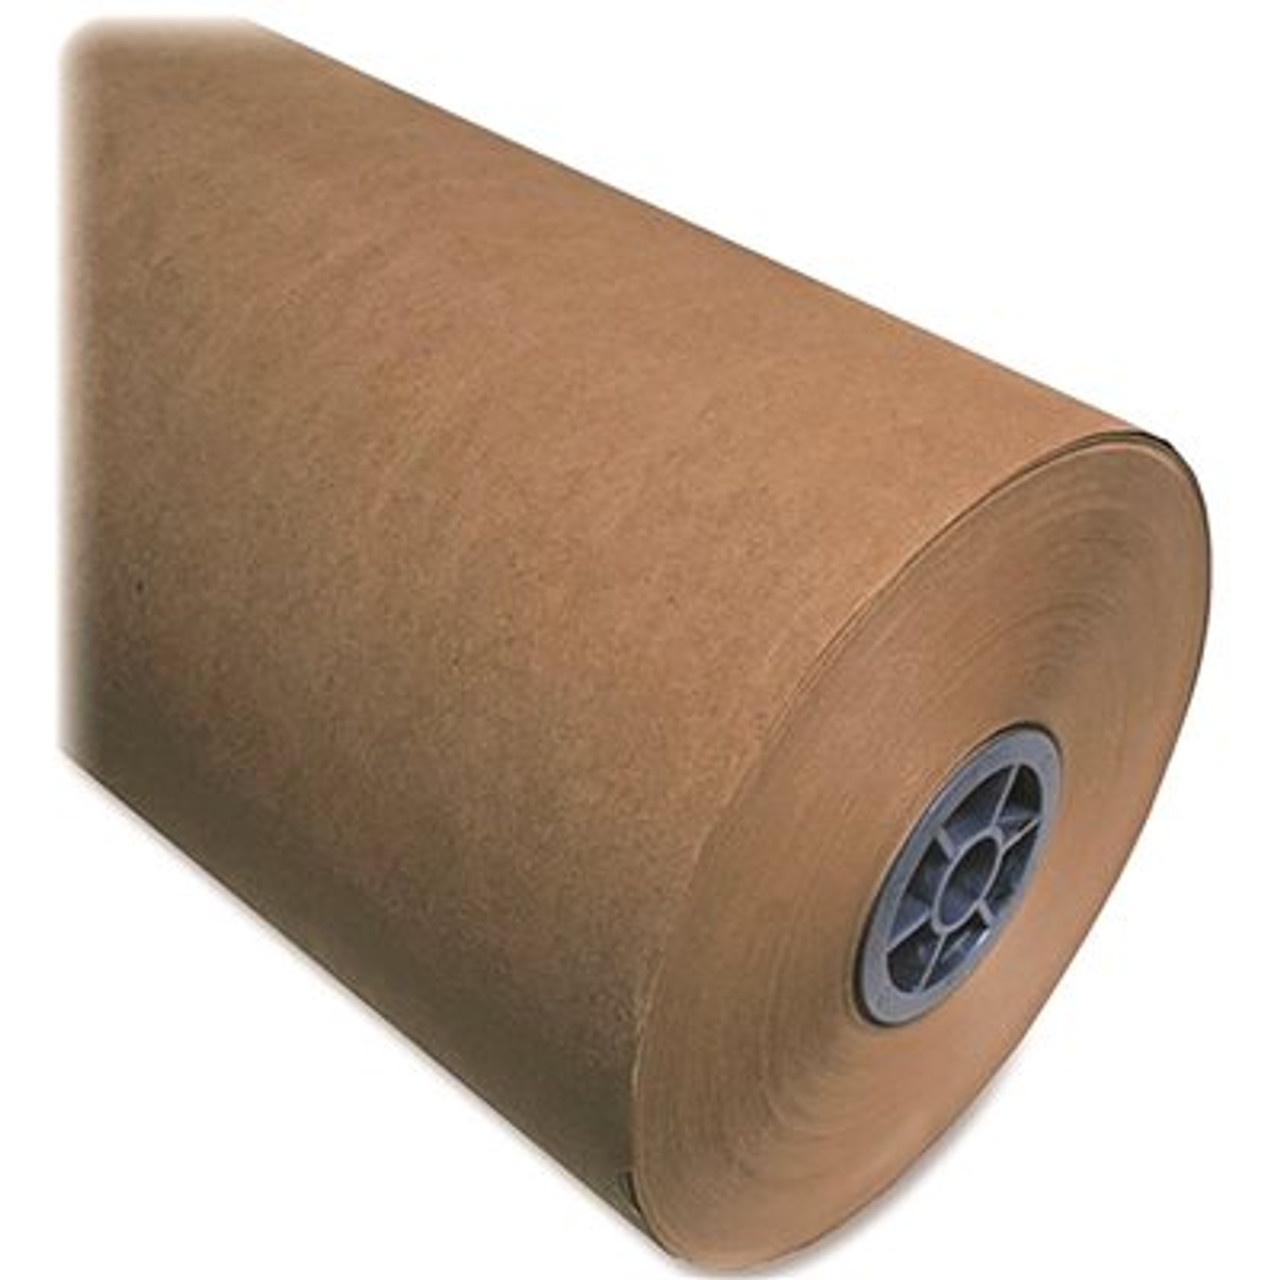 Sparco 40 lb., 24 in. by 1050 ft. Kraft Wrapping Paper